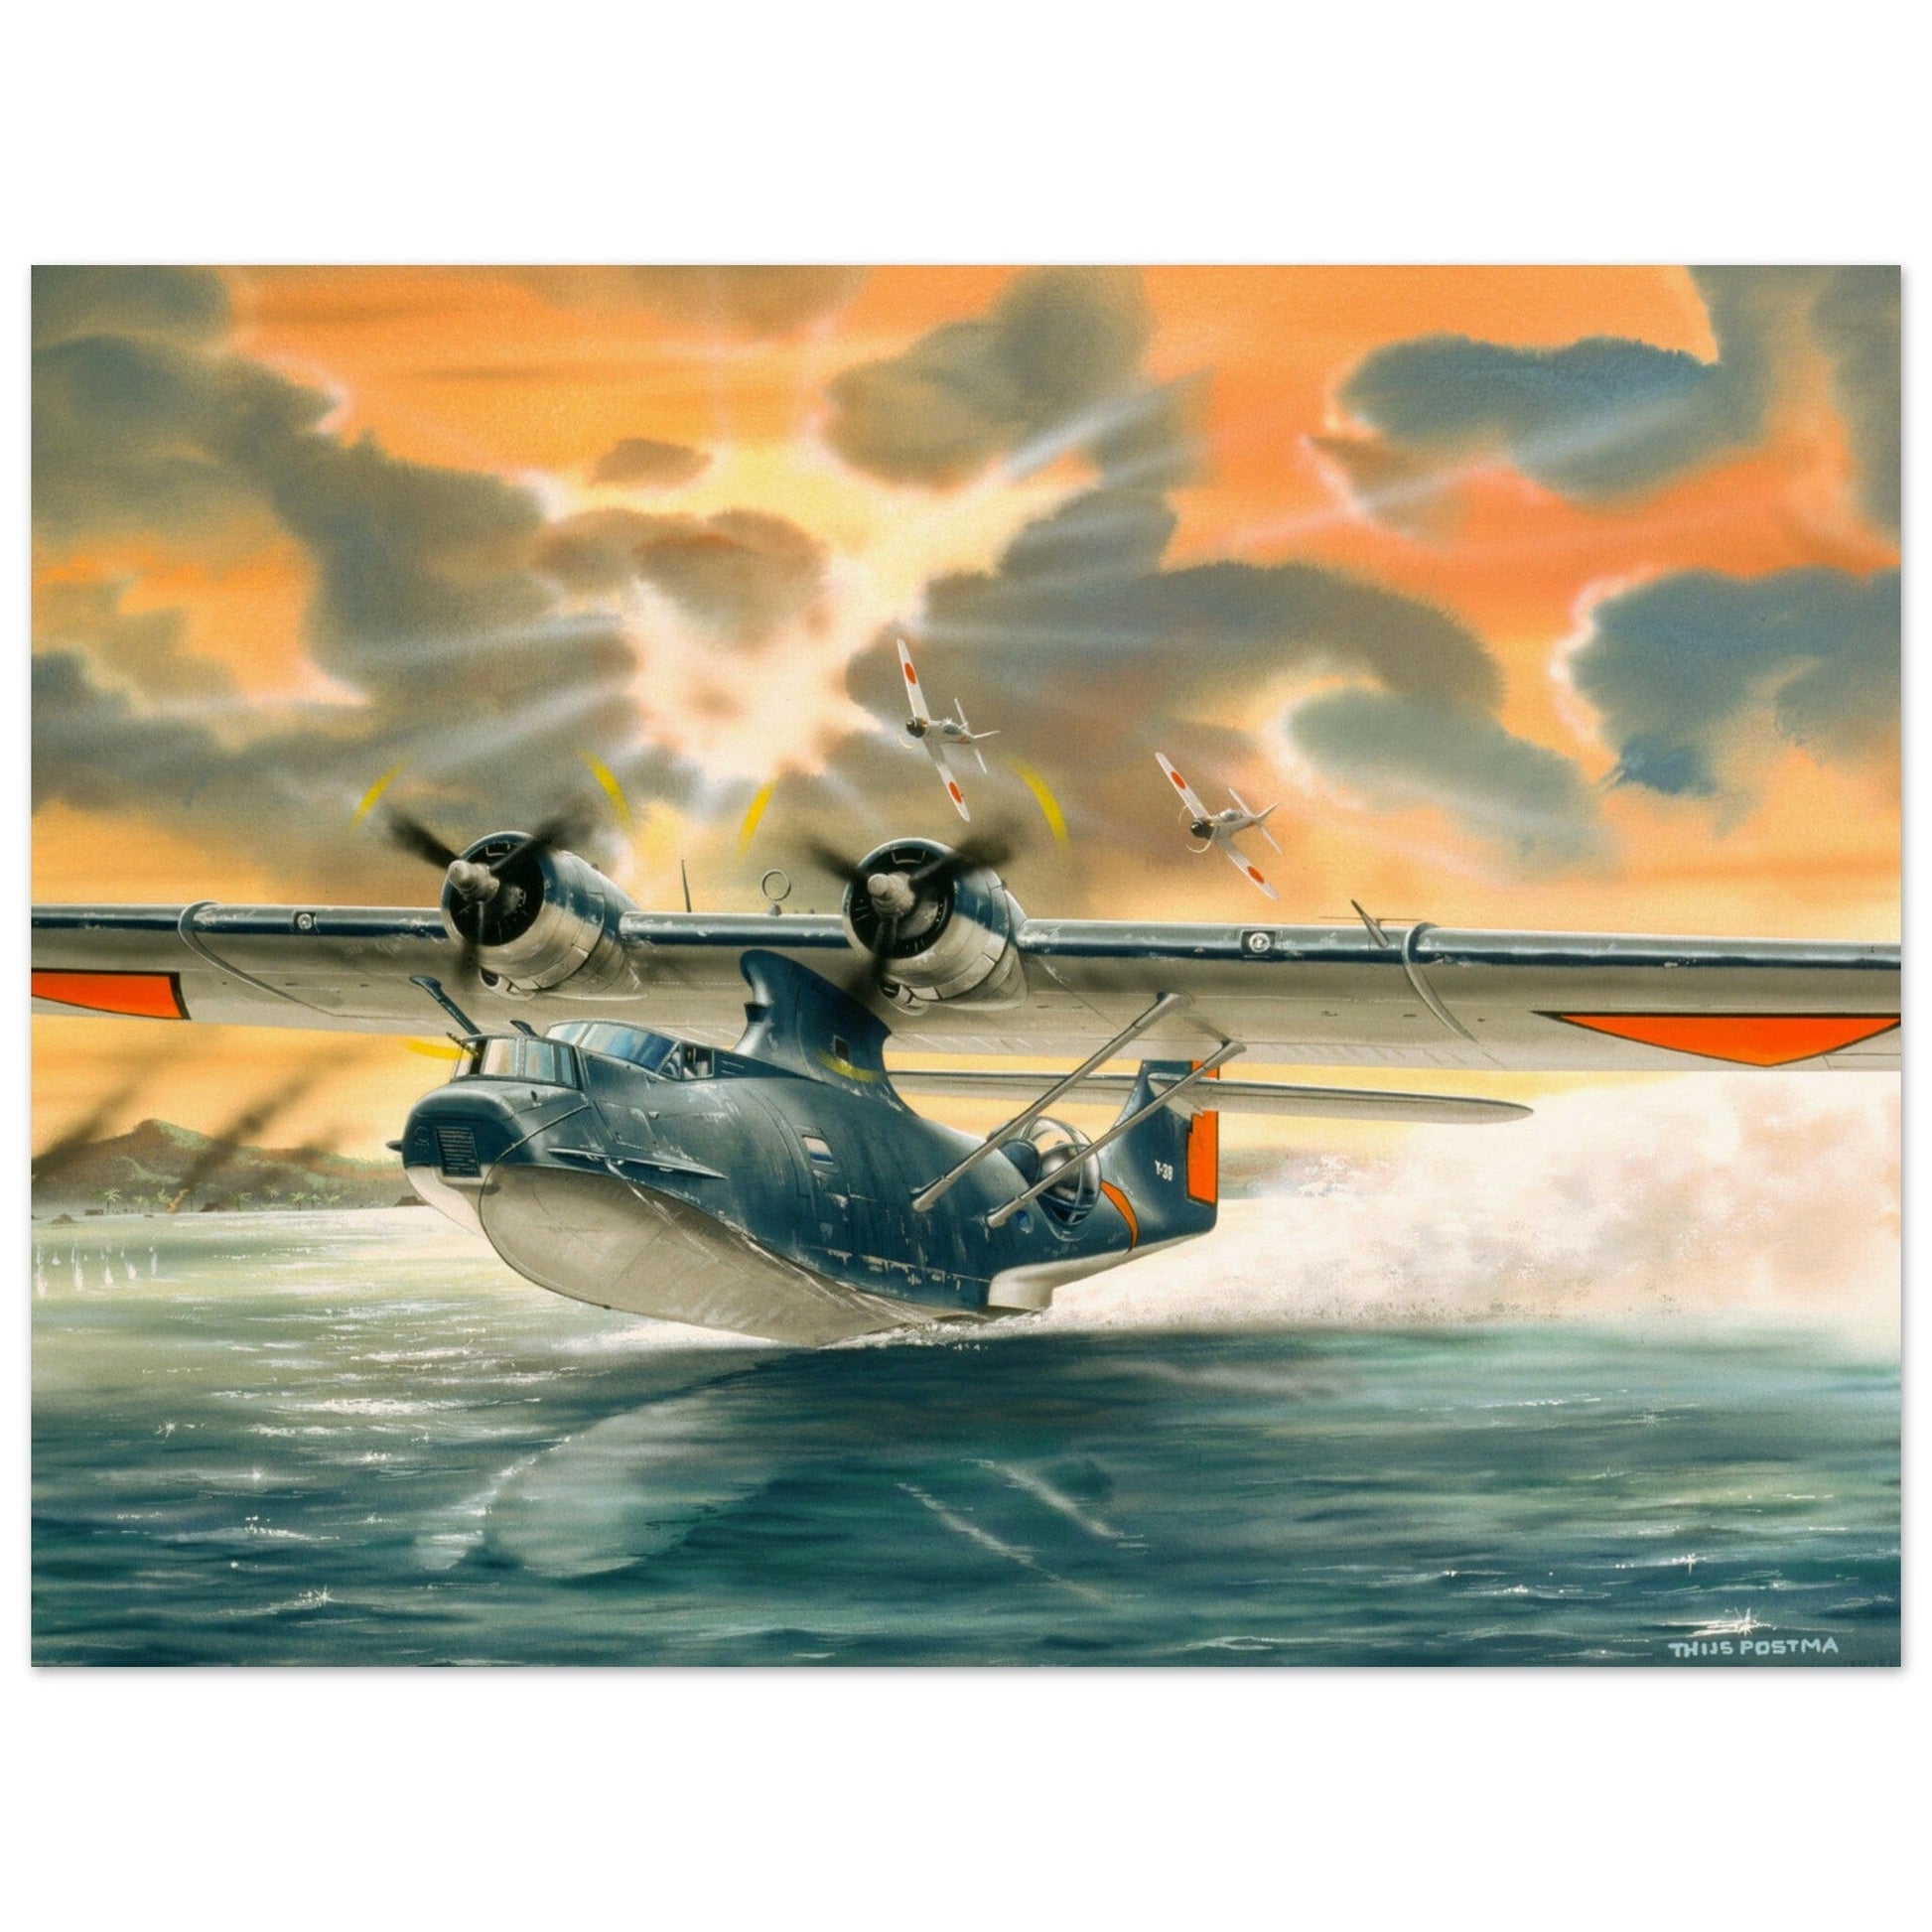 Thijs Postma - Poster - Convair PBY-5 Catalina Attacked By Zeros Poster Only TP Aviation Art 60x80 cm / 24x32″ 